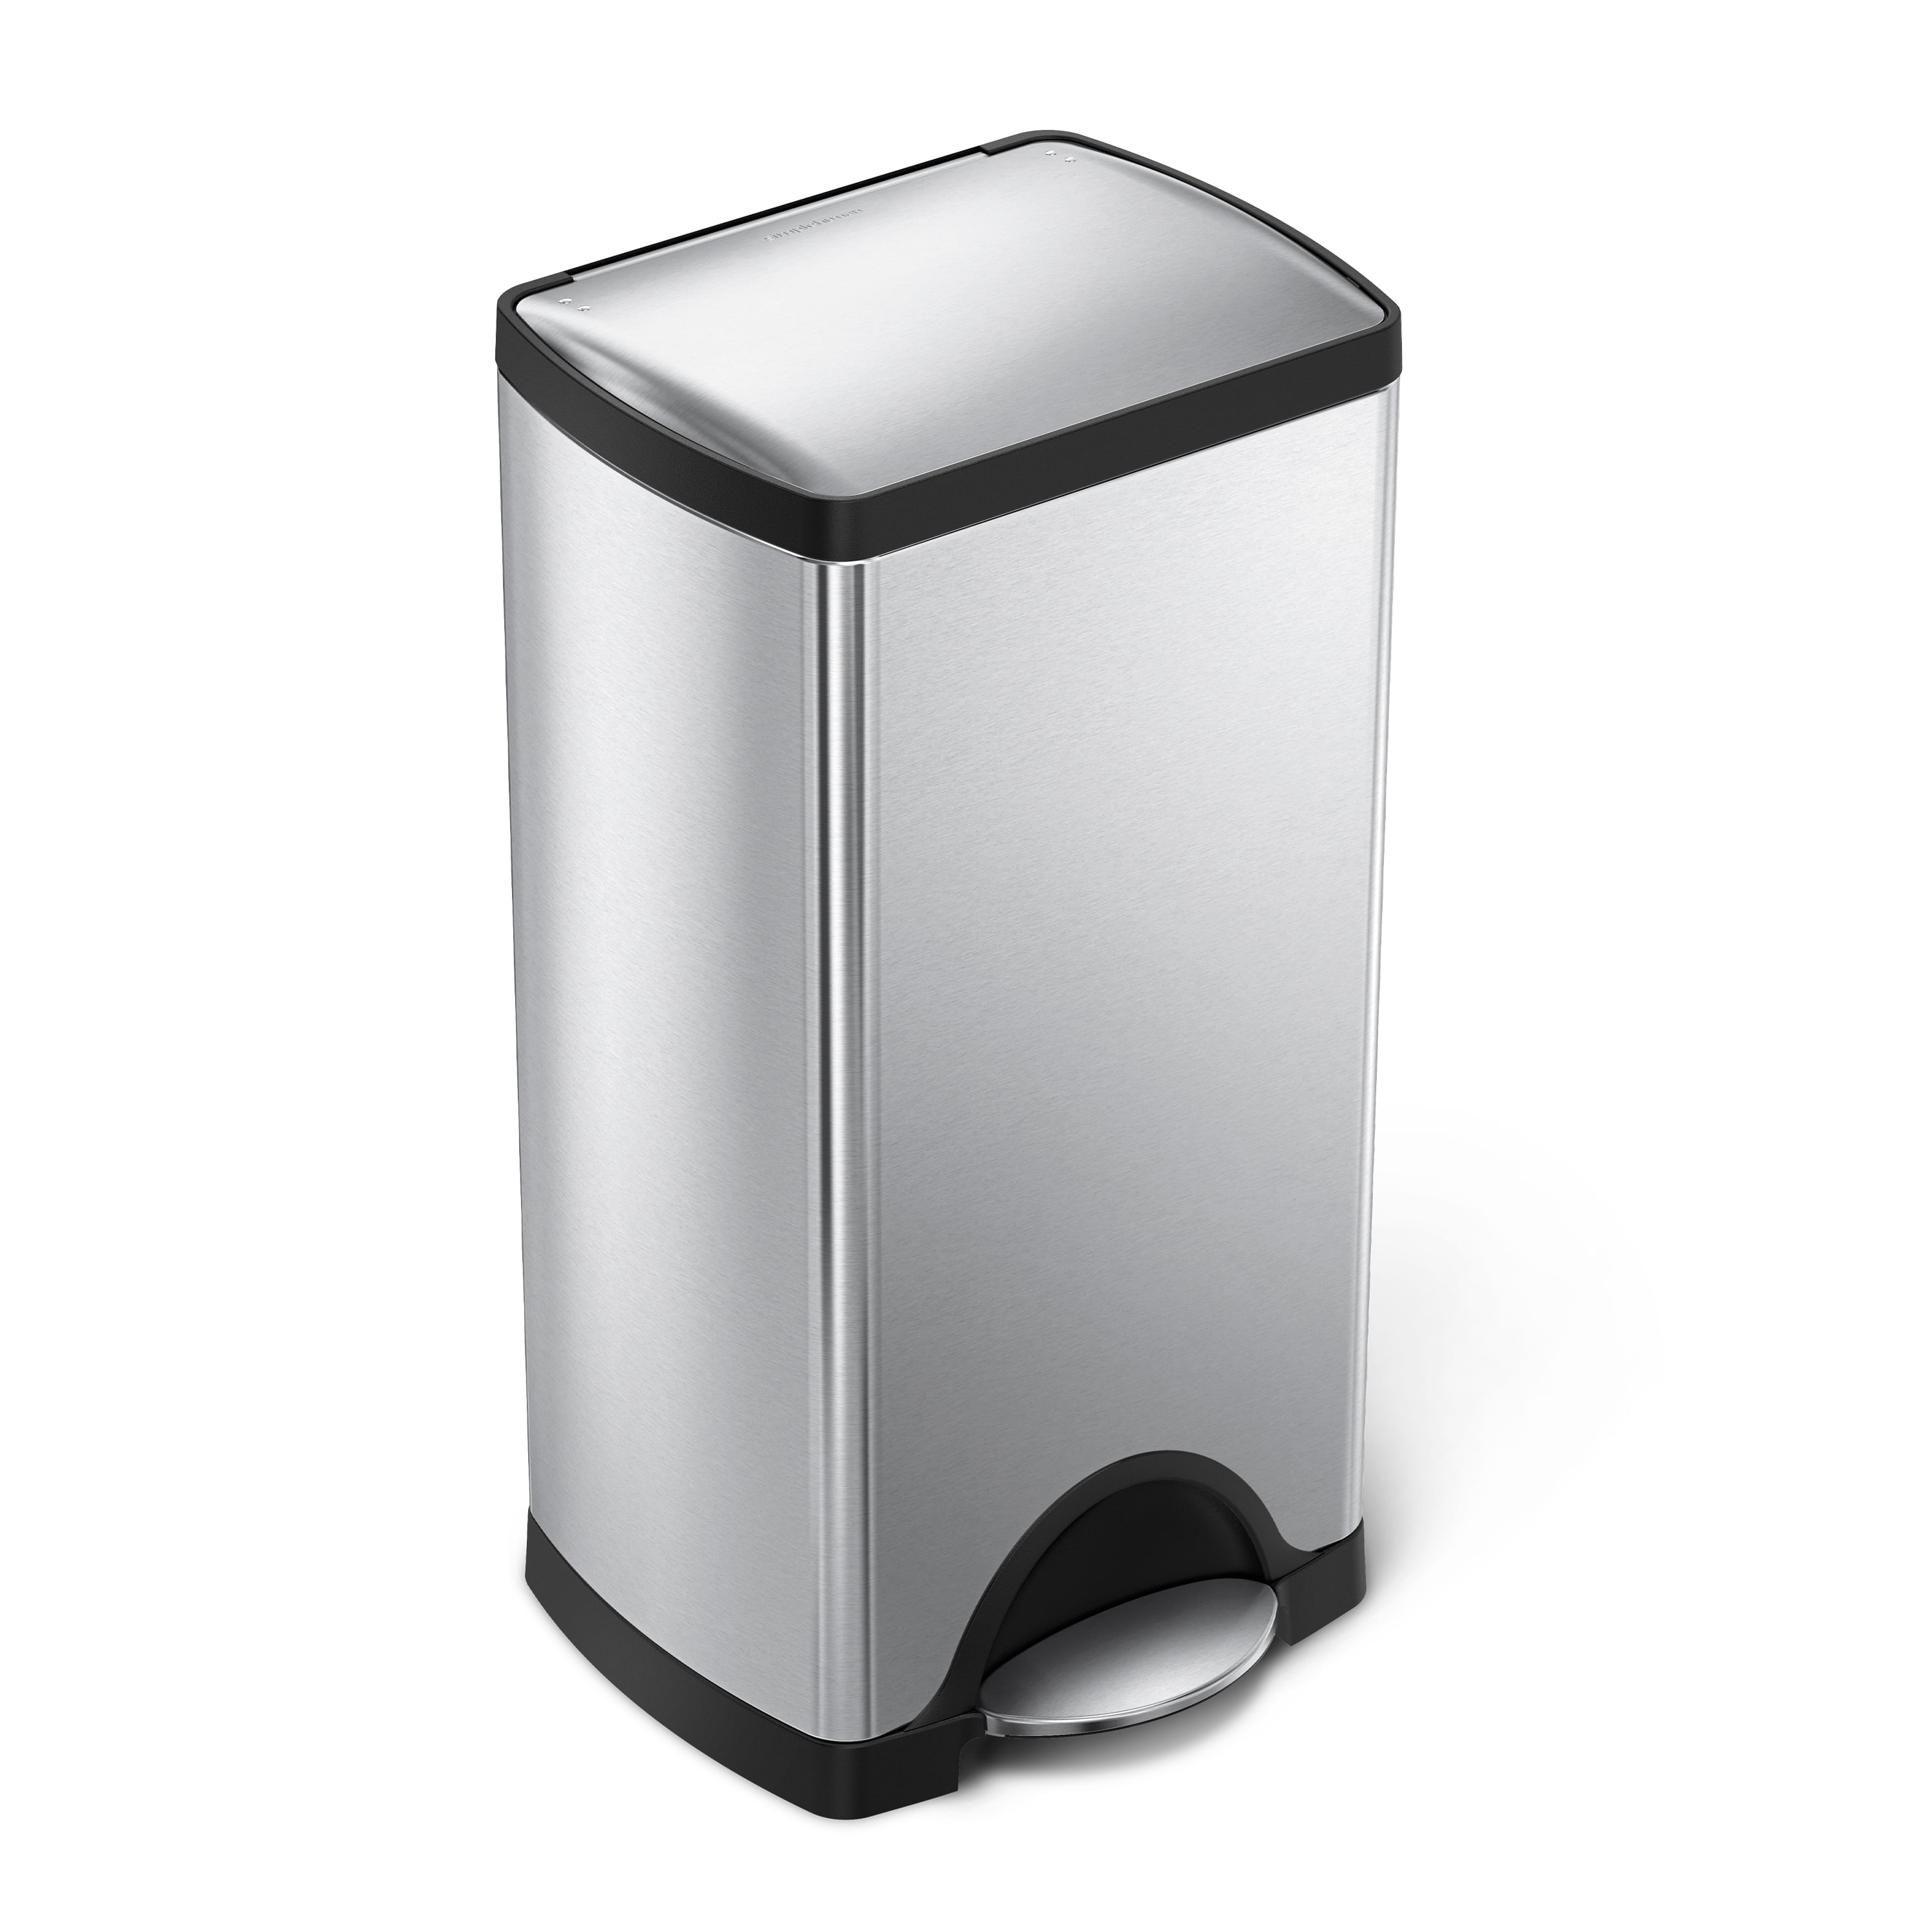 8 Gallon / 30 Liter SoftStep Step Pedal Trash Can